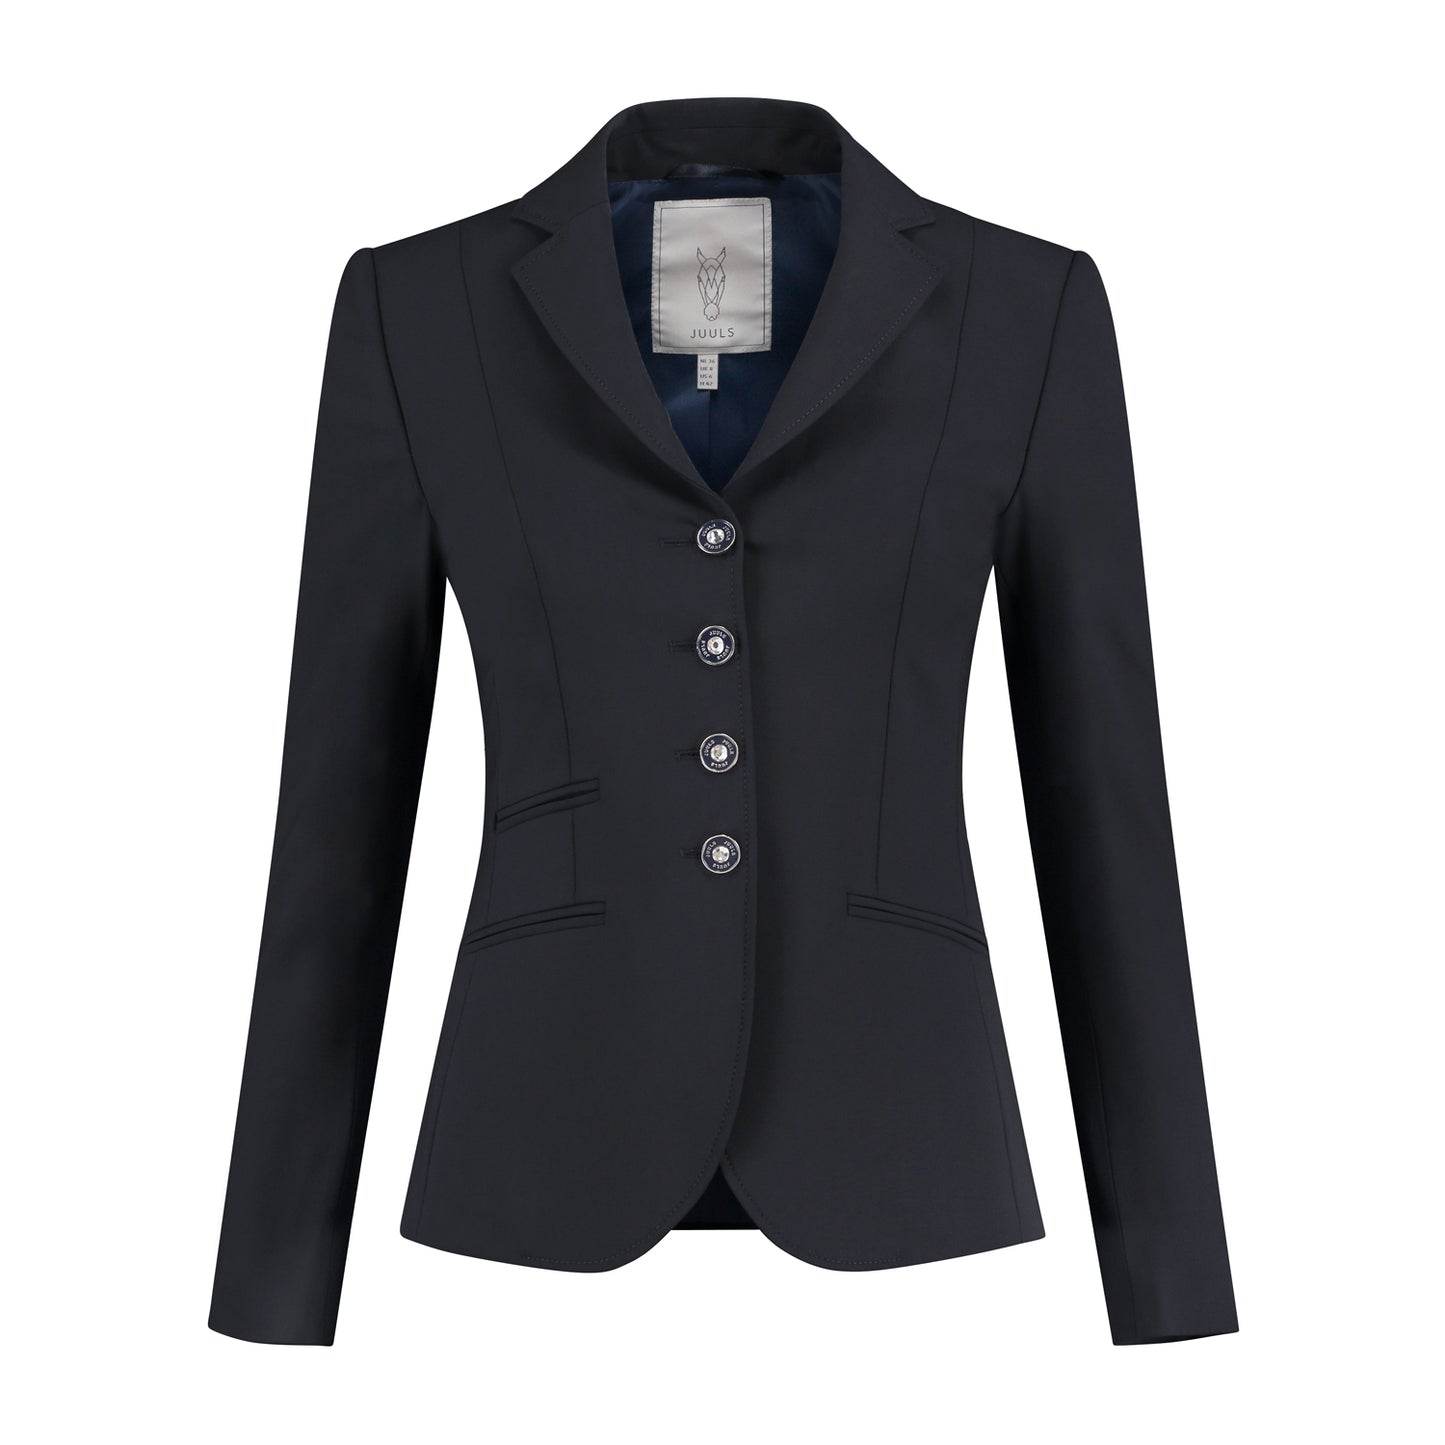 Competition jacket - Classic navy